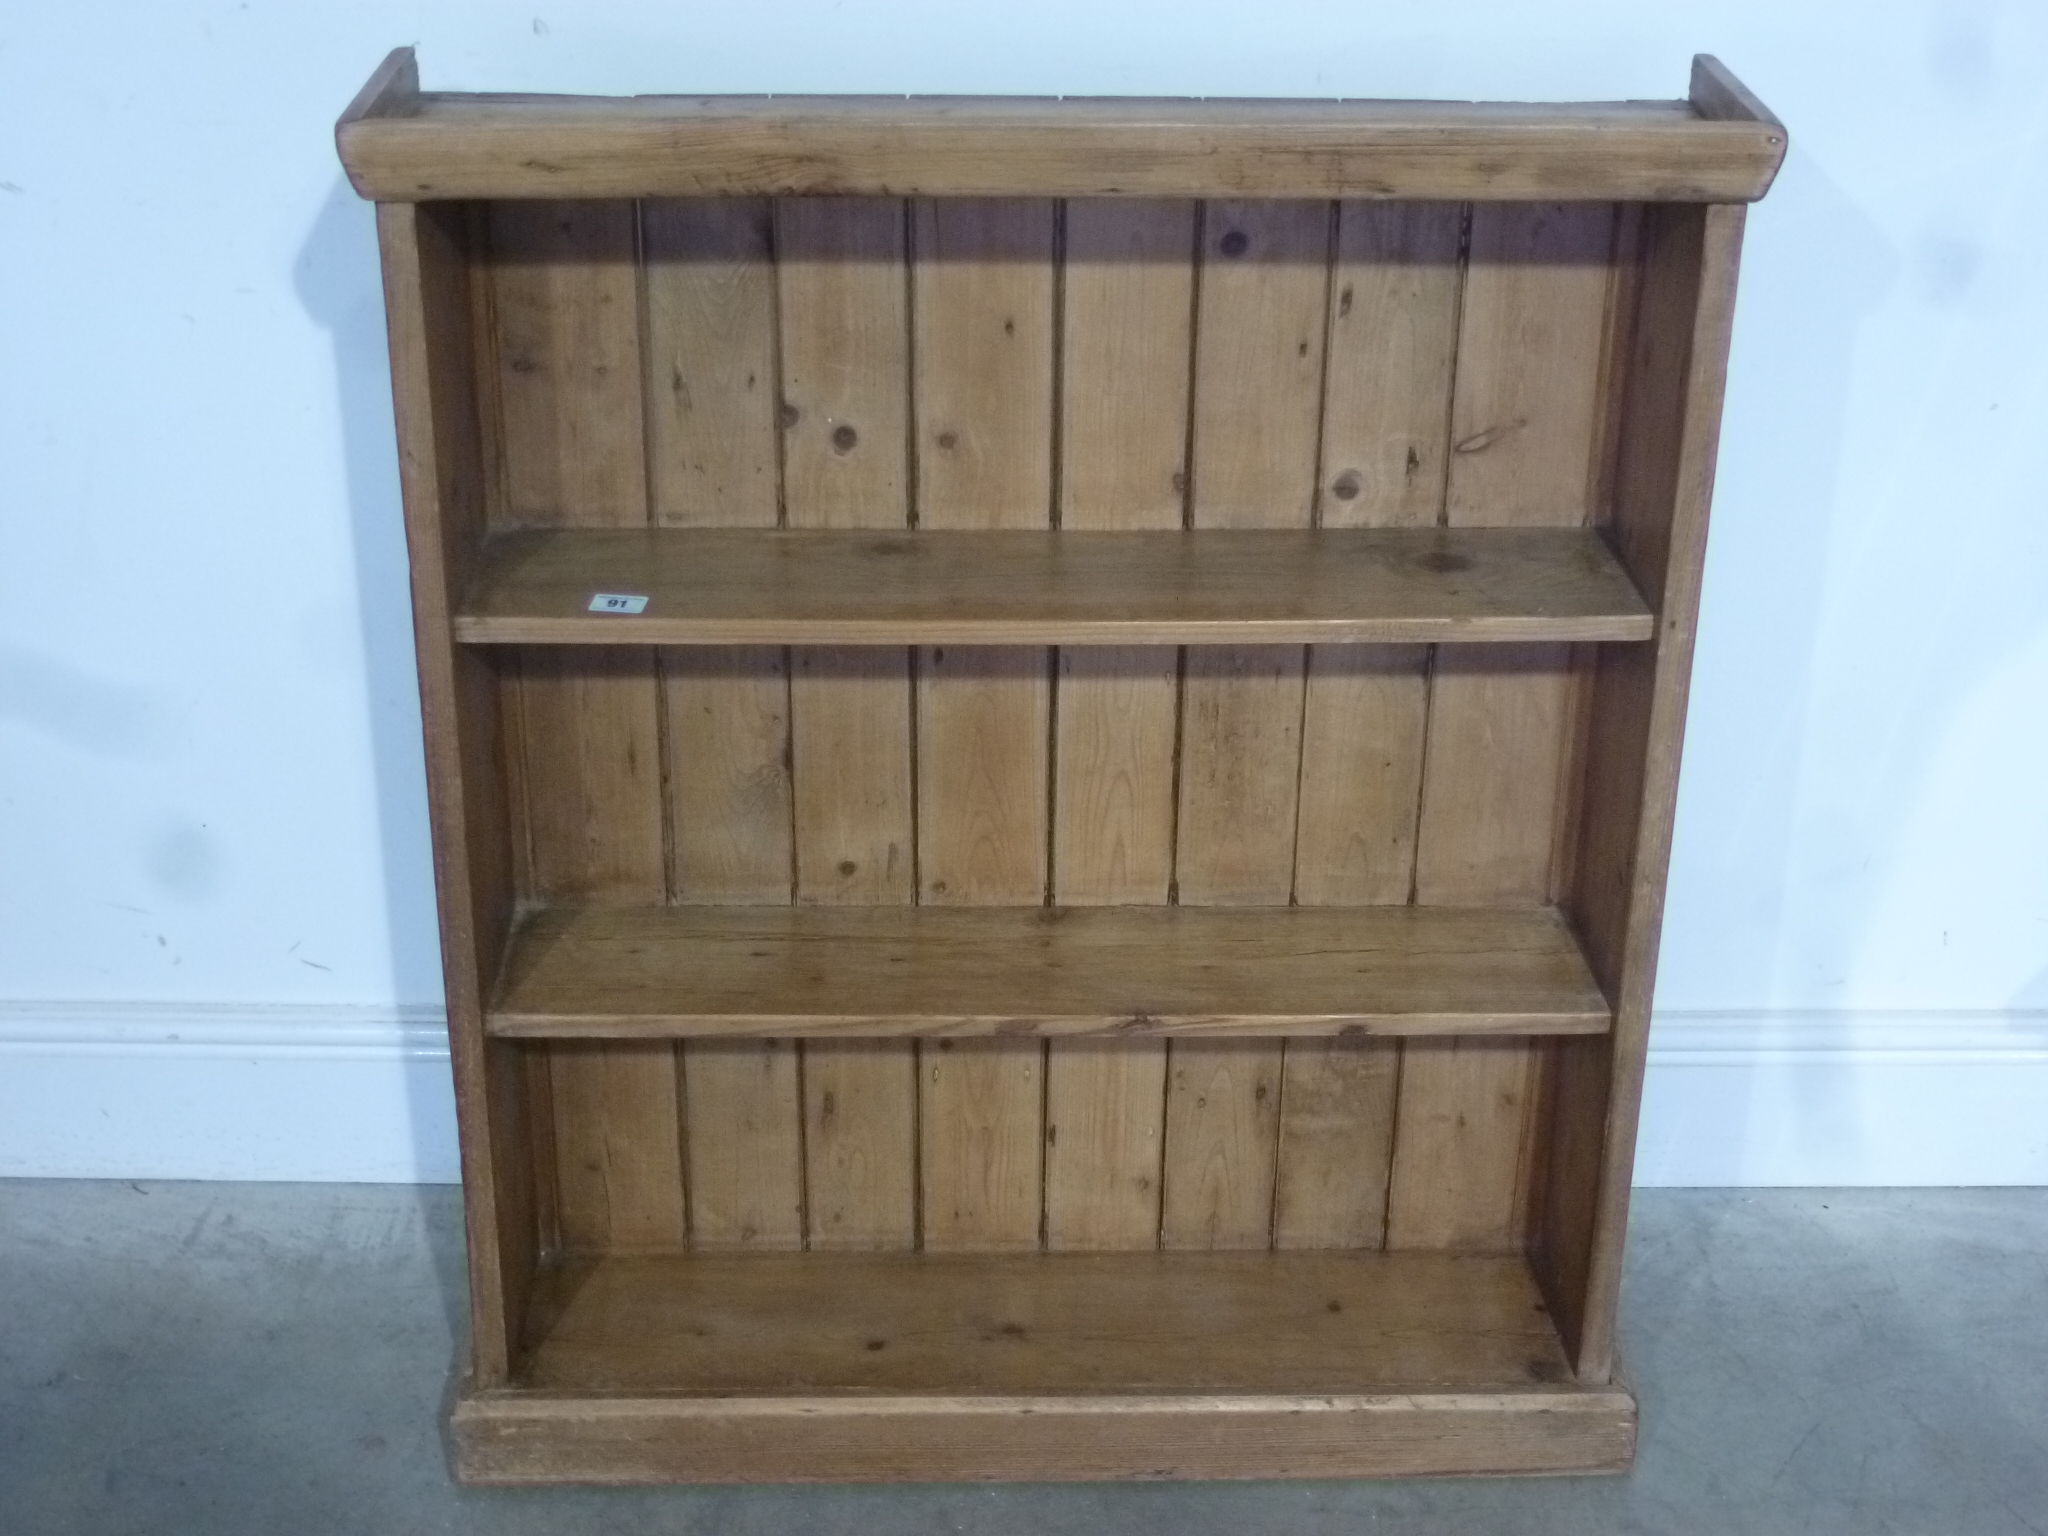 A waxed pine open bookcase - Height 89 cm x 76 cm x 18 cm